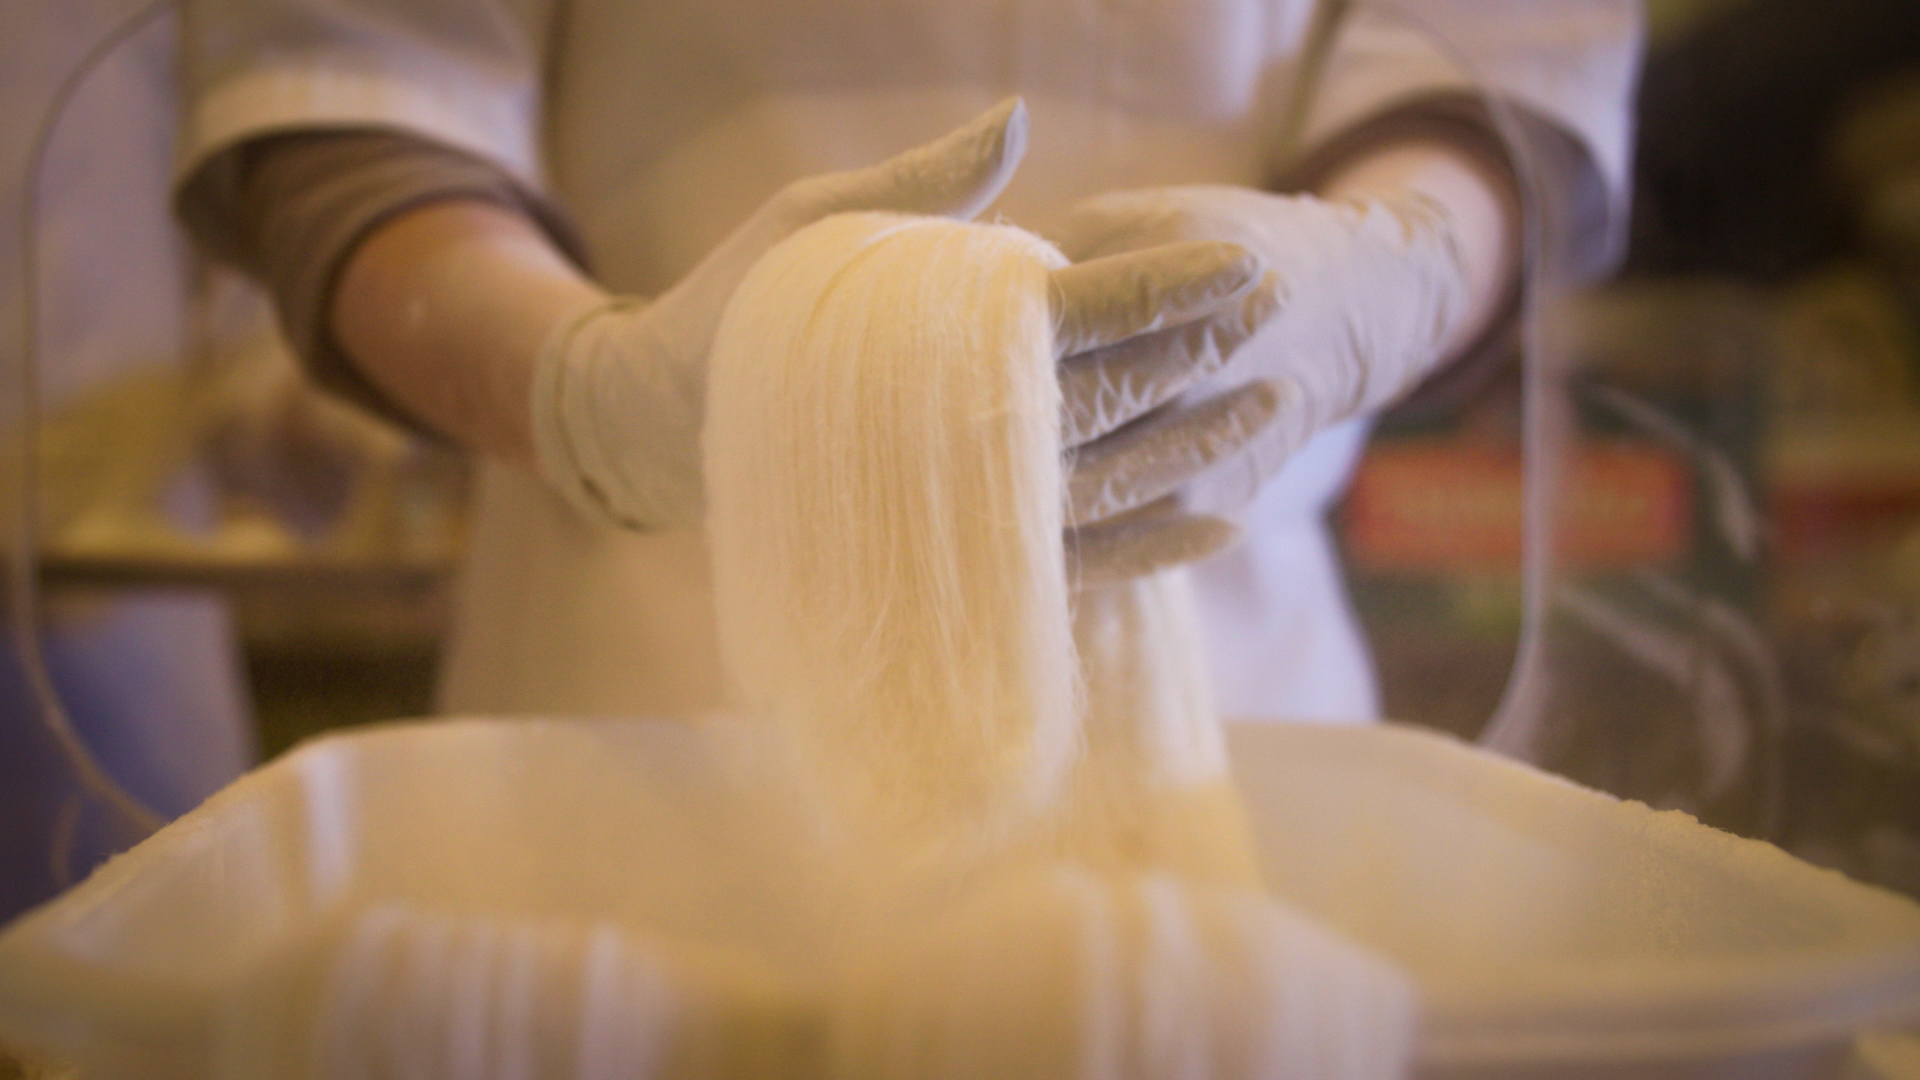 Dragon’s Beard Candy Is Vanishing From Chinatown. This Confectioner Wants to Save It